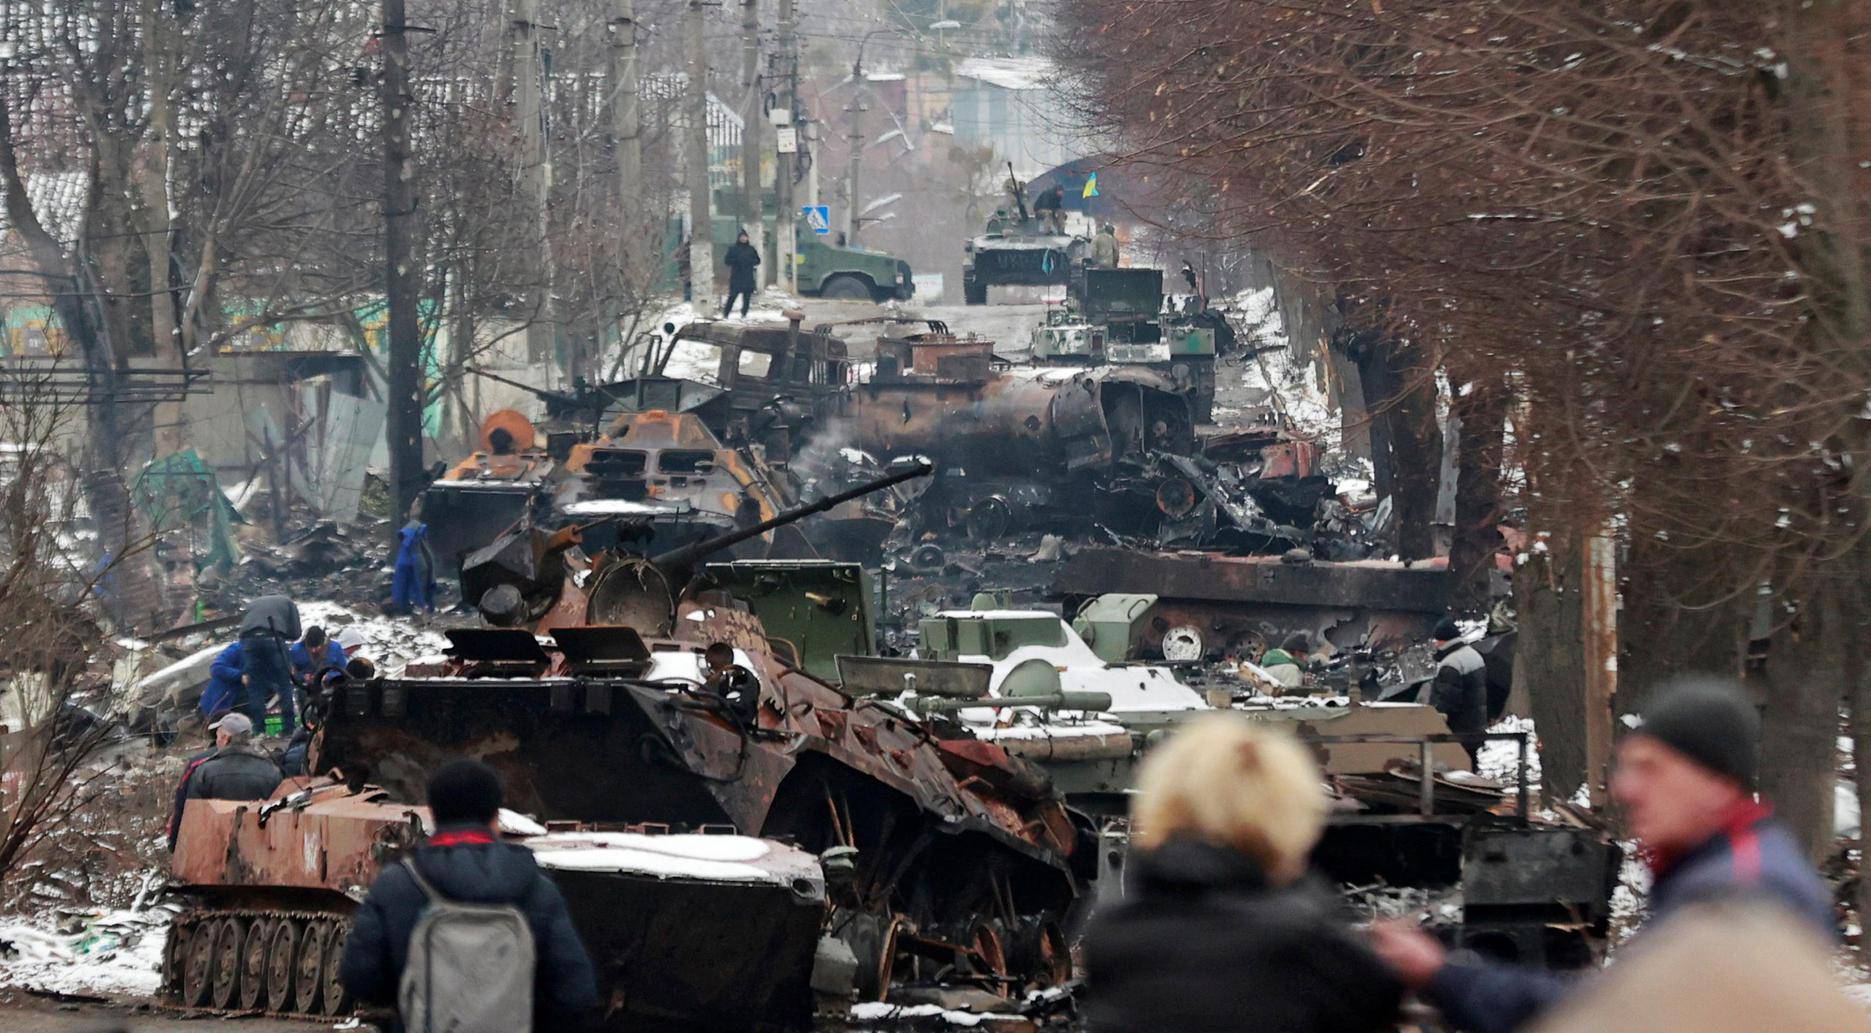 A view shows destroyed military vehicles on a street in Bucha